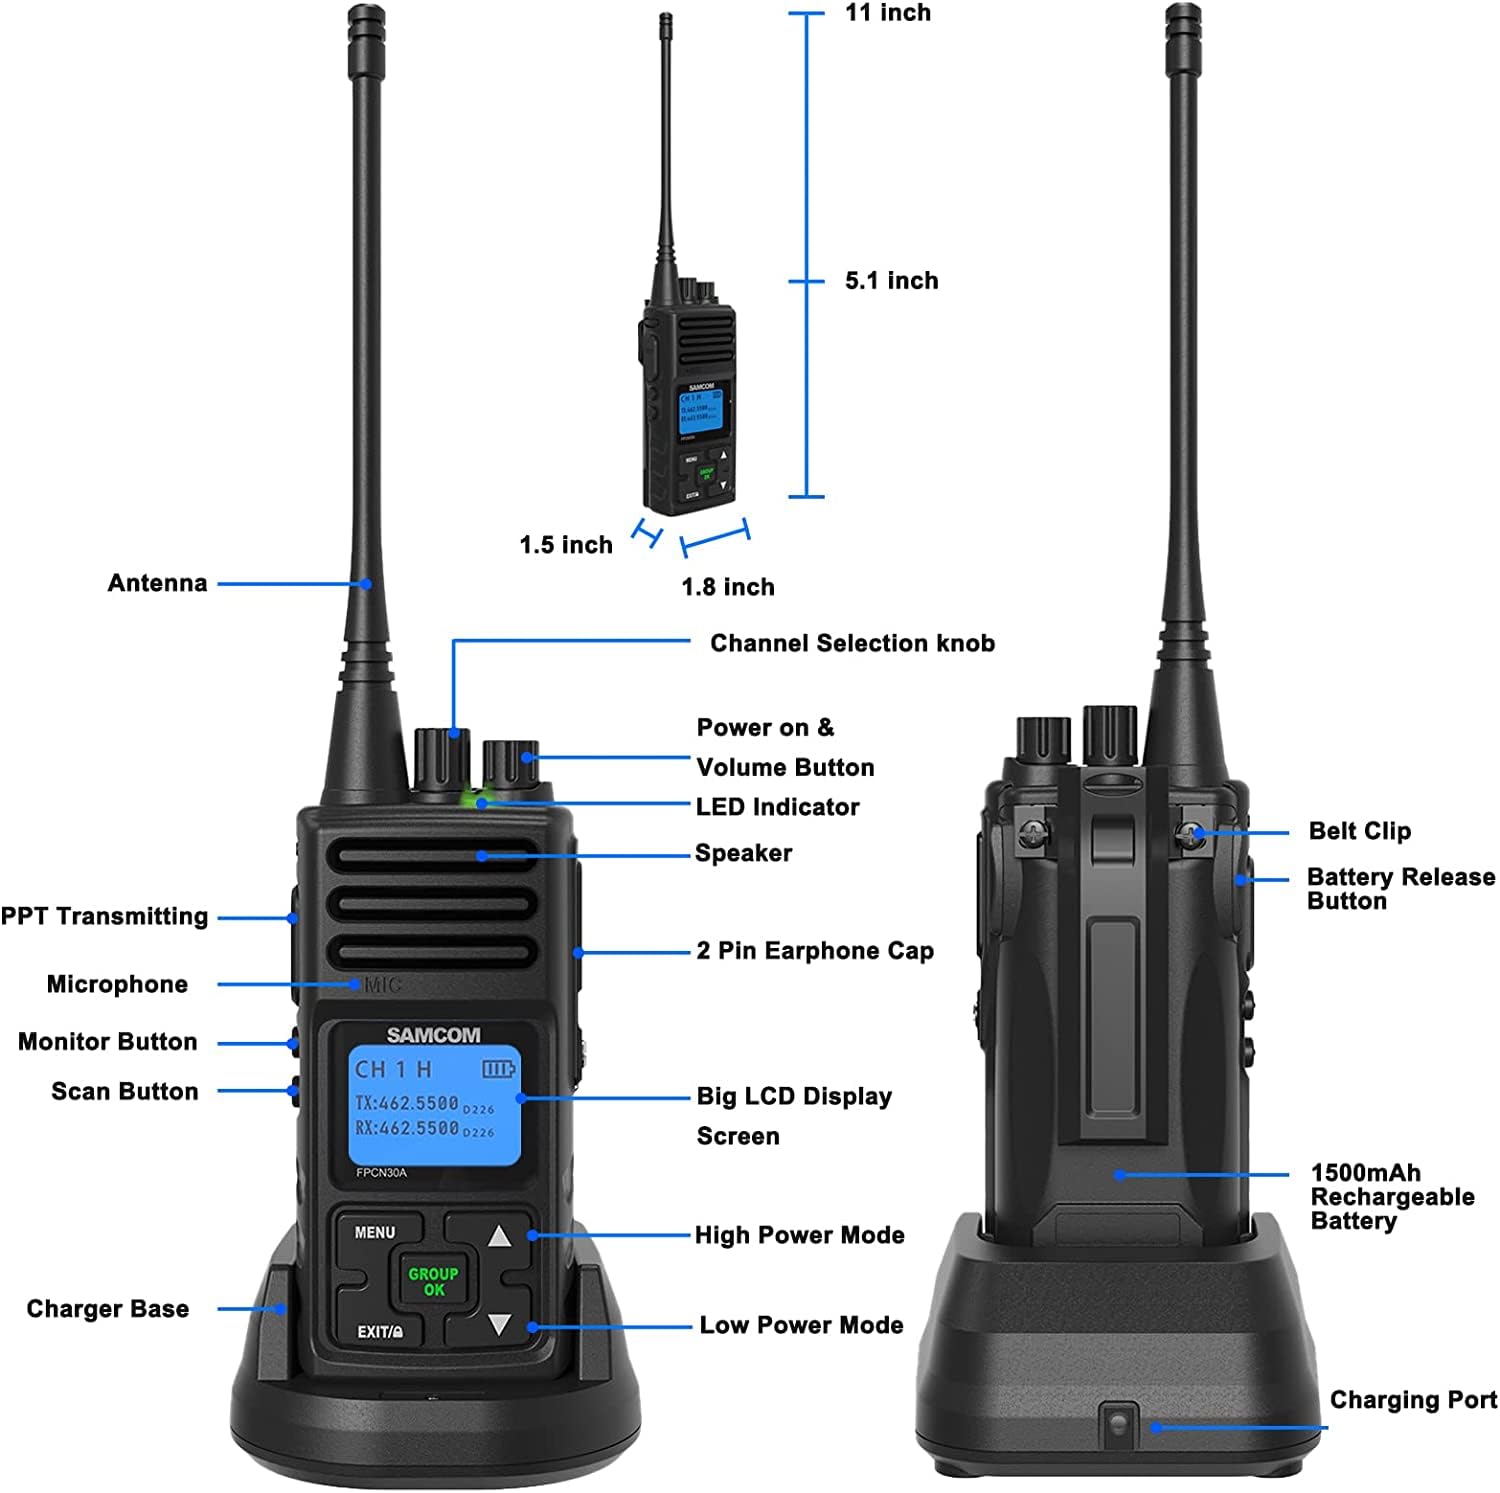 SAMCOM FPCN30A Two Way Radios Long Range 5 watts,Programmable UHF 2 Way Radios, 1500mAh Battery Operated Walkie Talkies with Earpieces for Adults, Group Call Long Distance Radio, 1 Pack